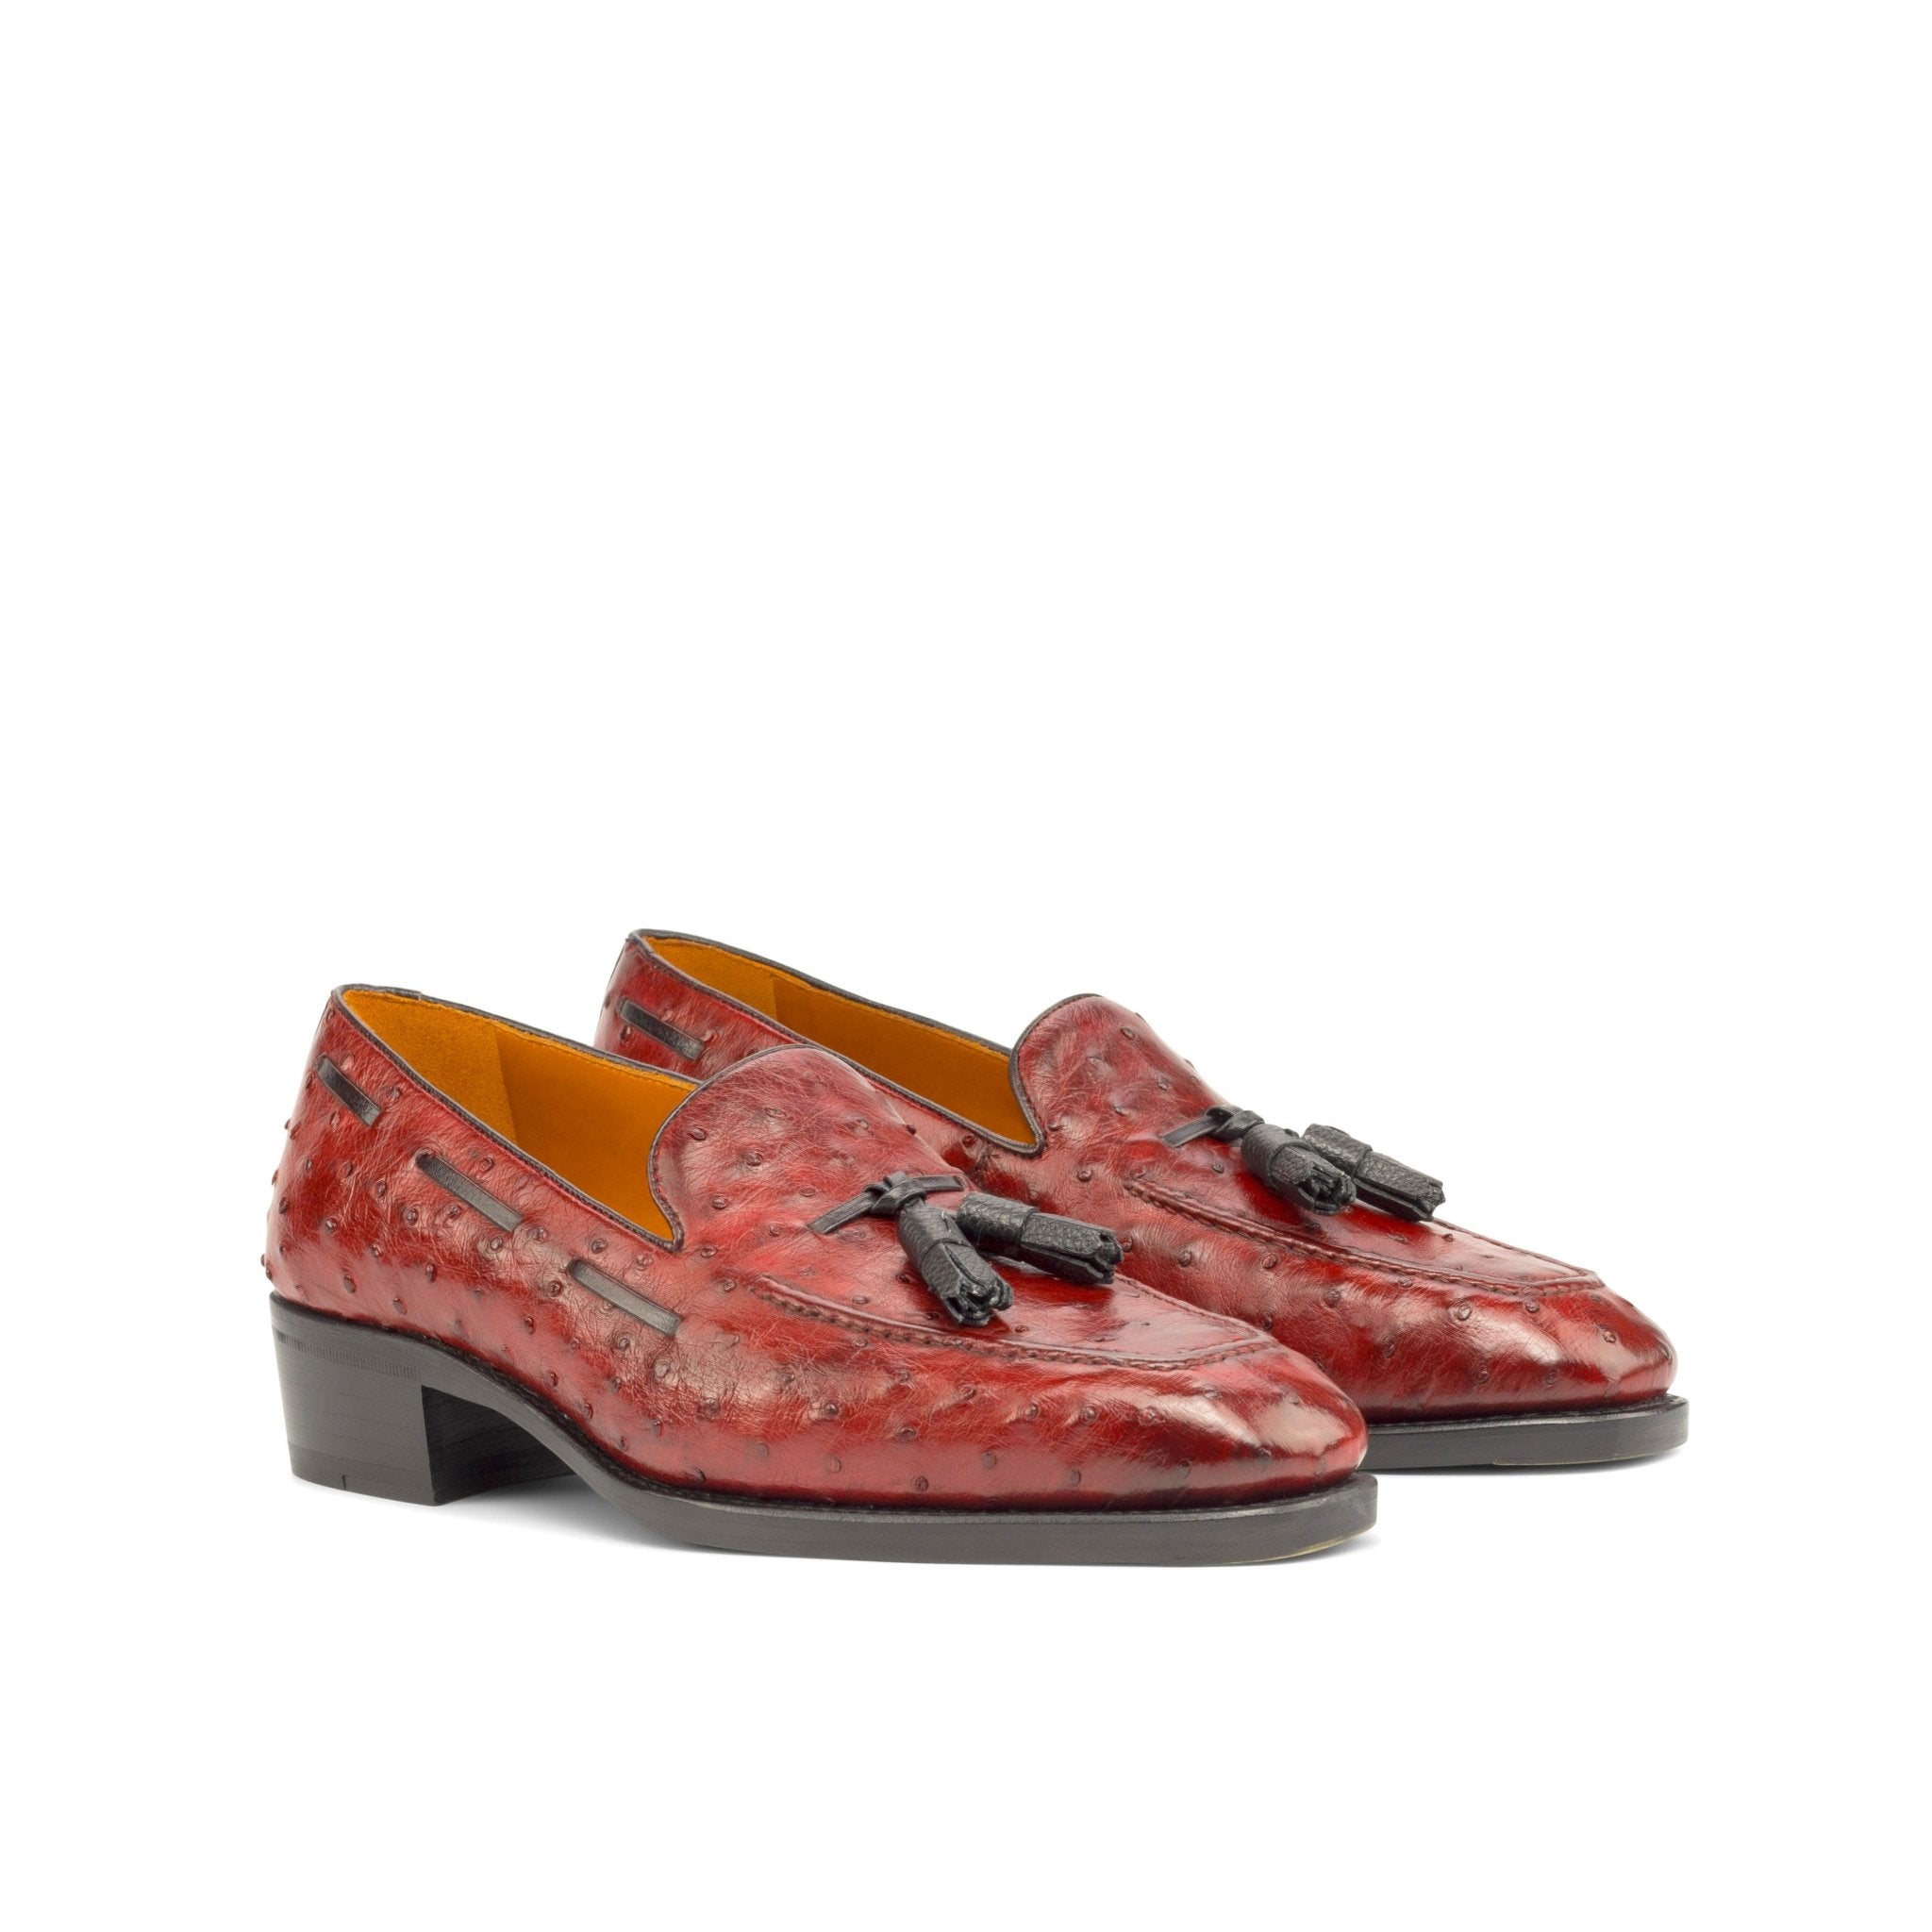 Men's Loafers in Red Ostrich with Toe Taps and Tall Heel - Maison de Kingsley Couture Harmonie et Fureur Spain